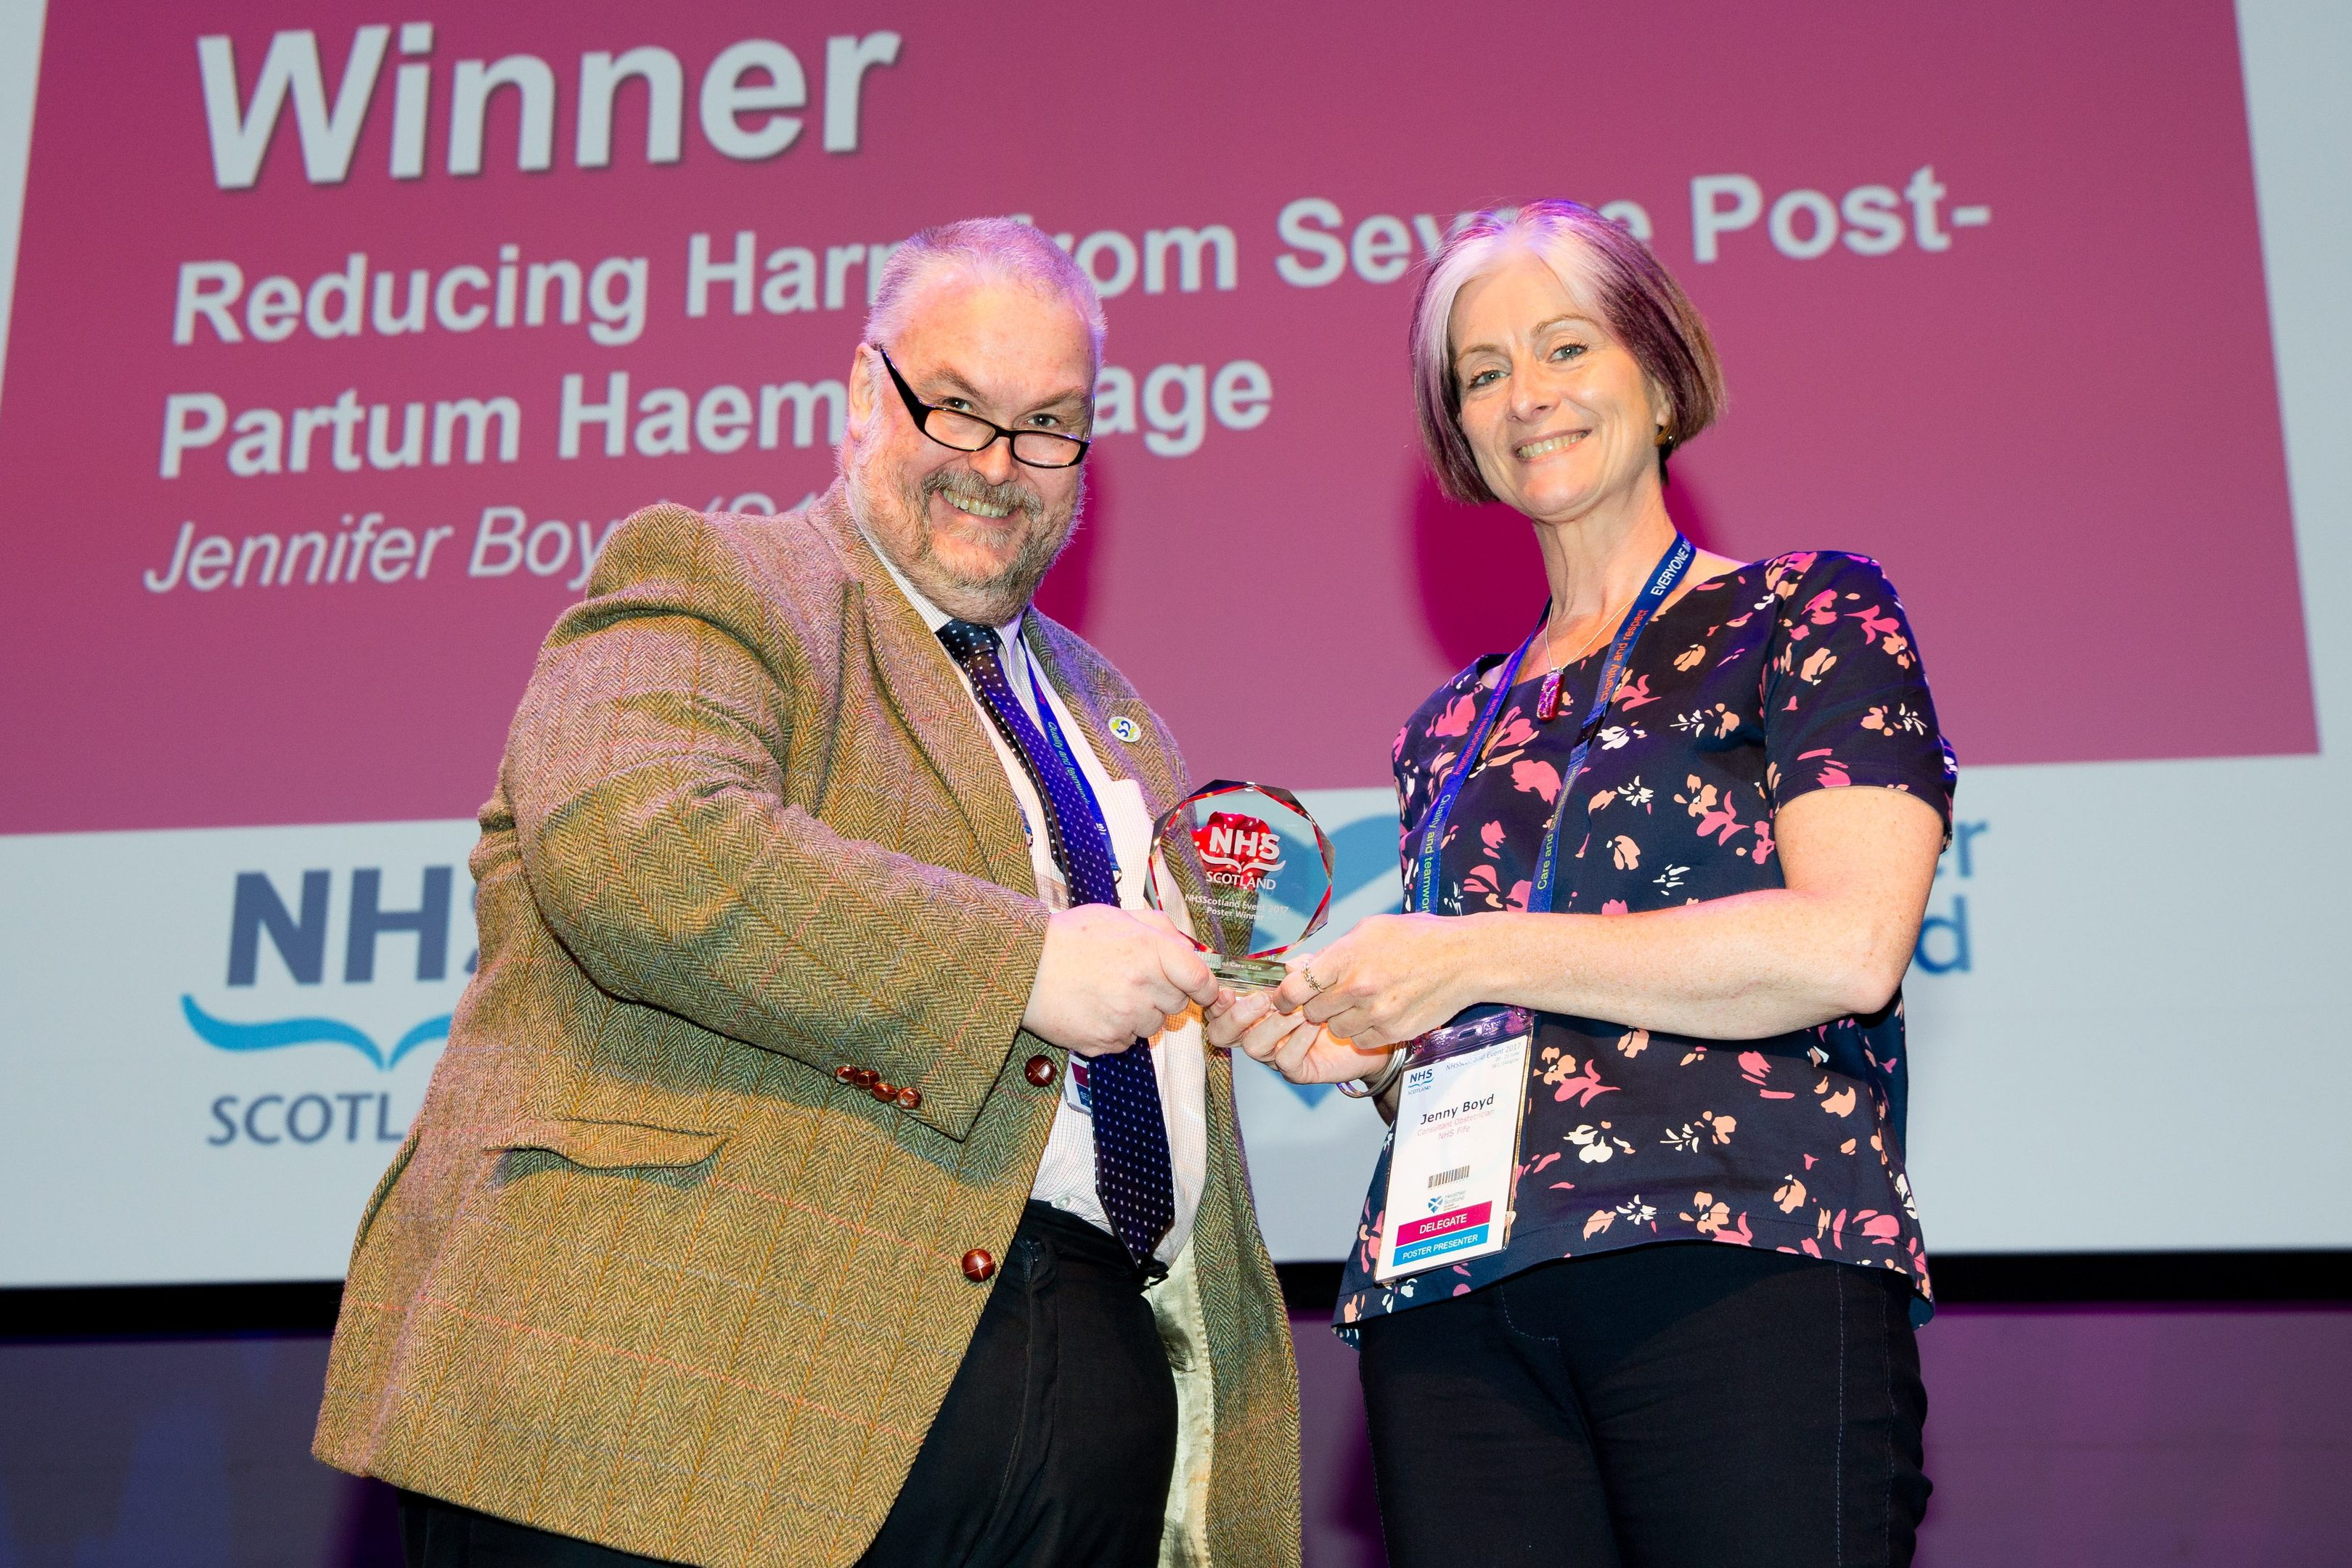 Dr Boyd accepting the  Safe Award from Paul Gray, chief executive of NHS Scotland and director general of health and social care.